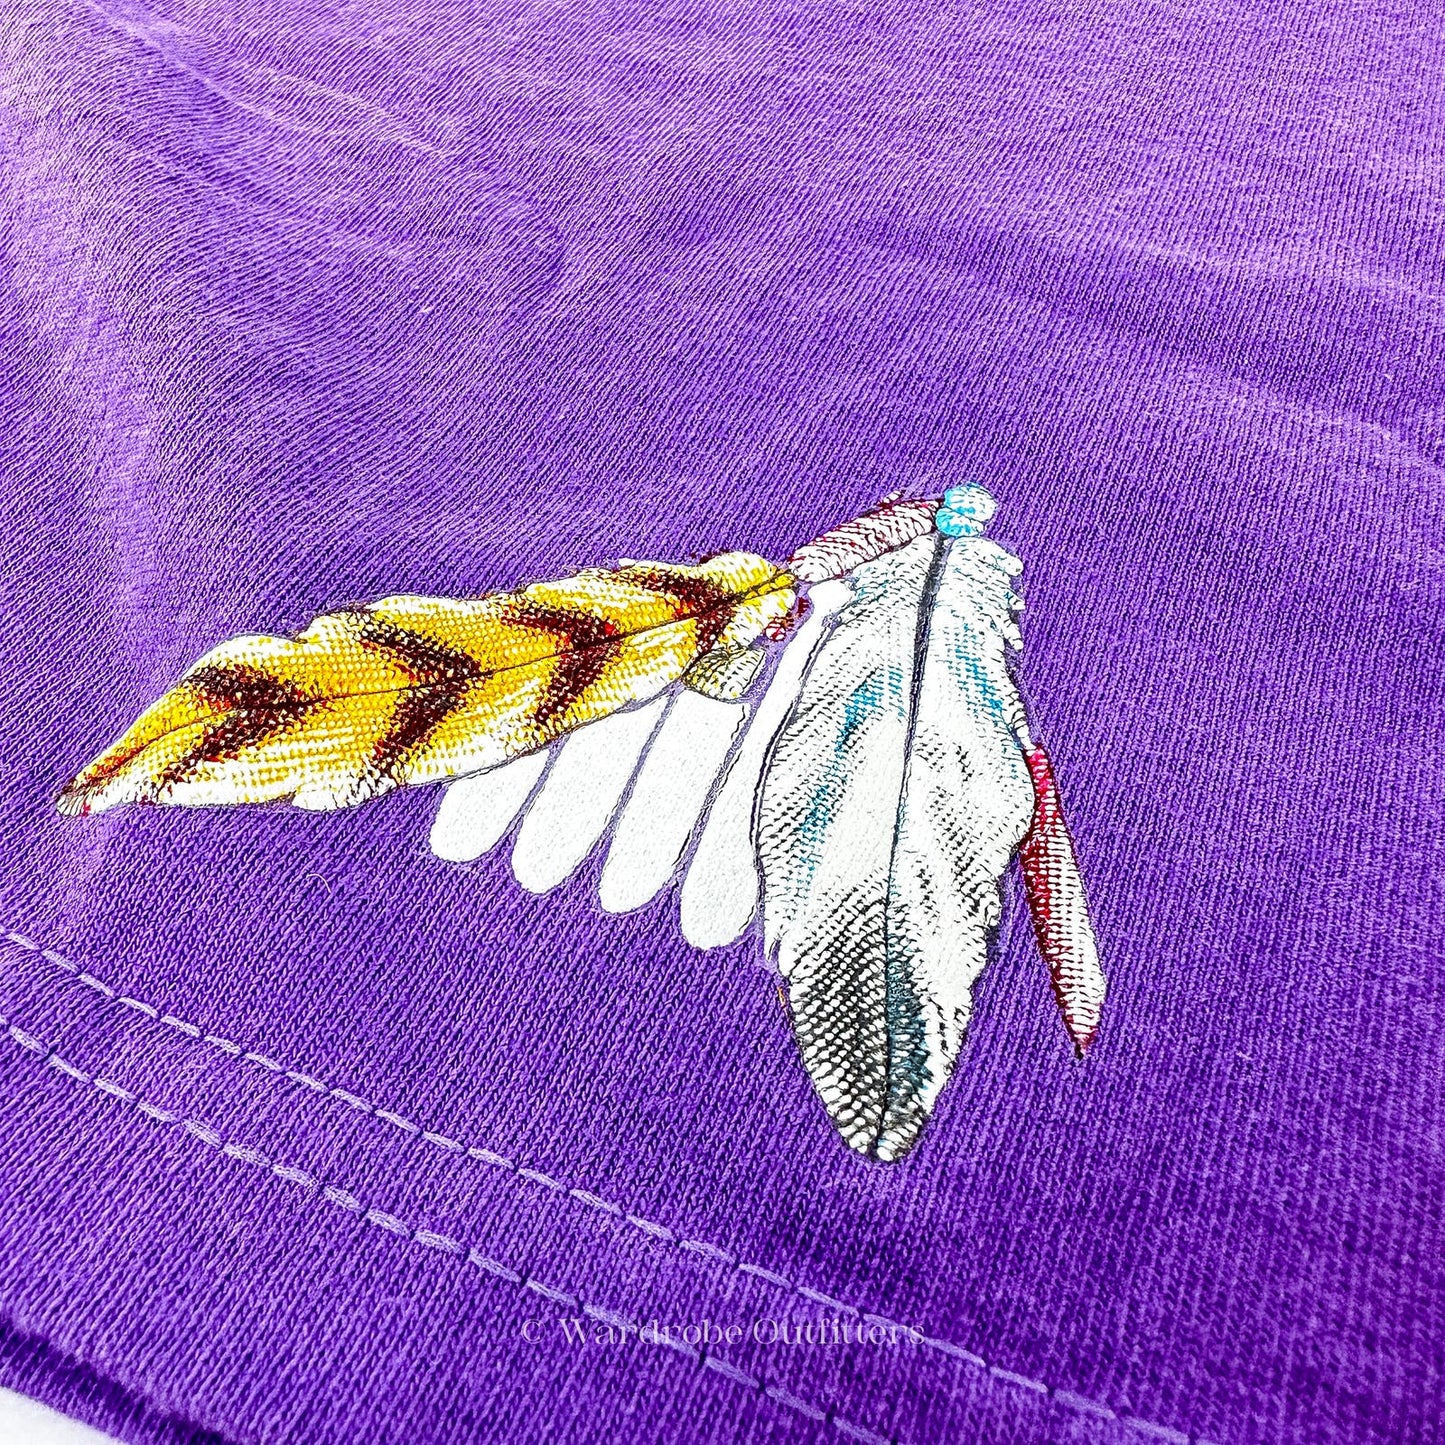 Vintage 90s Native American Western Feather Tee Shirt